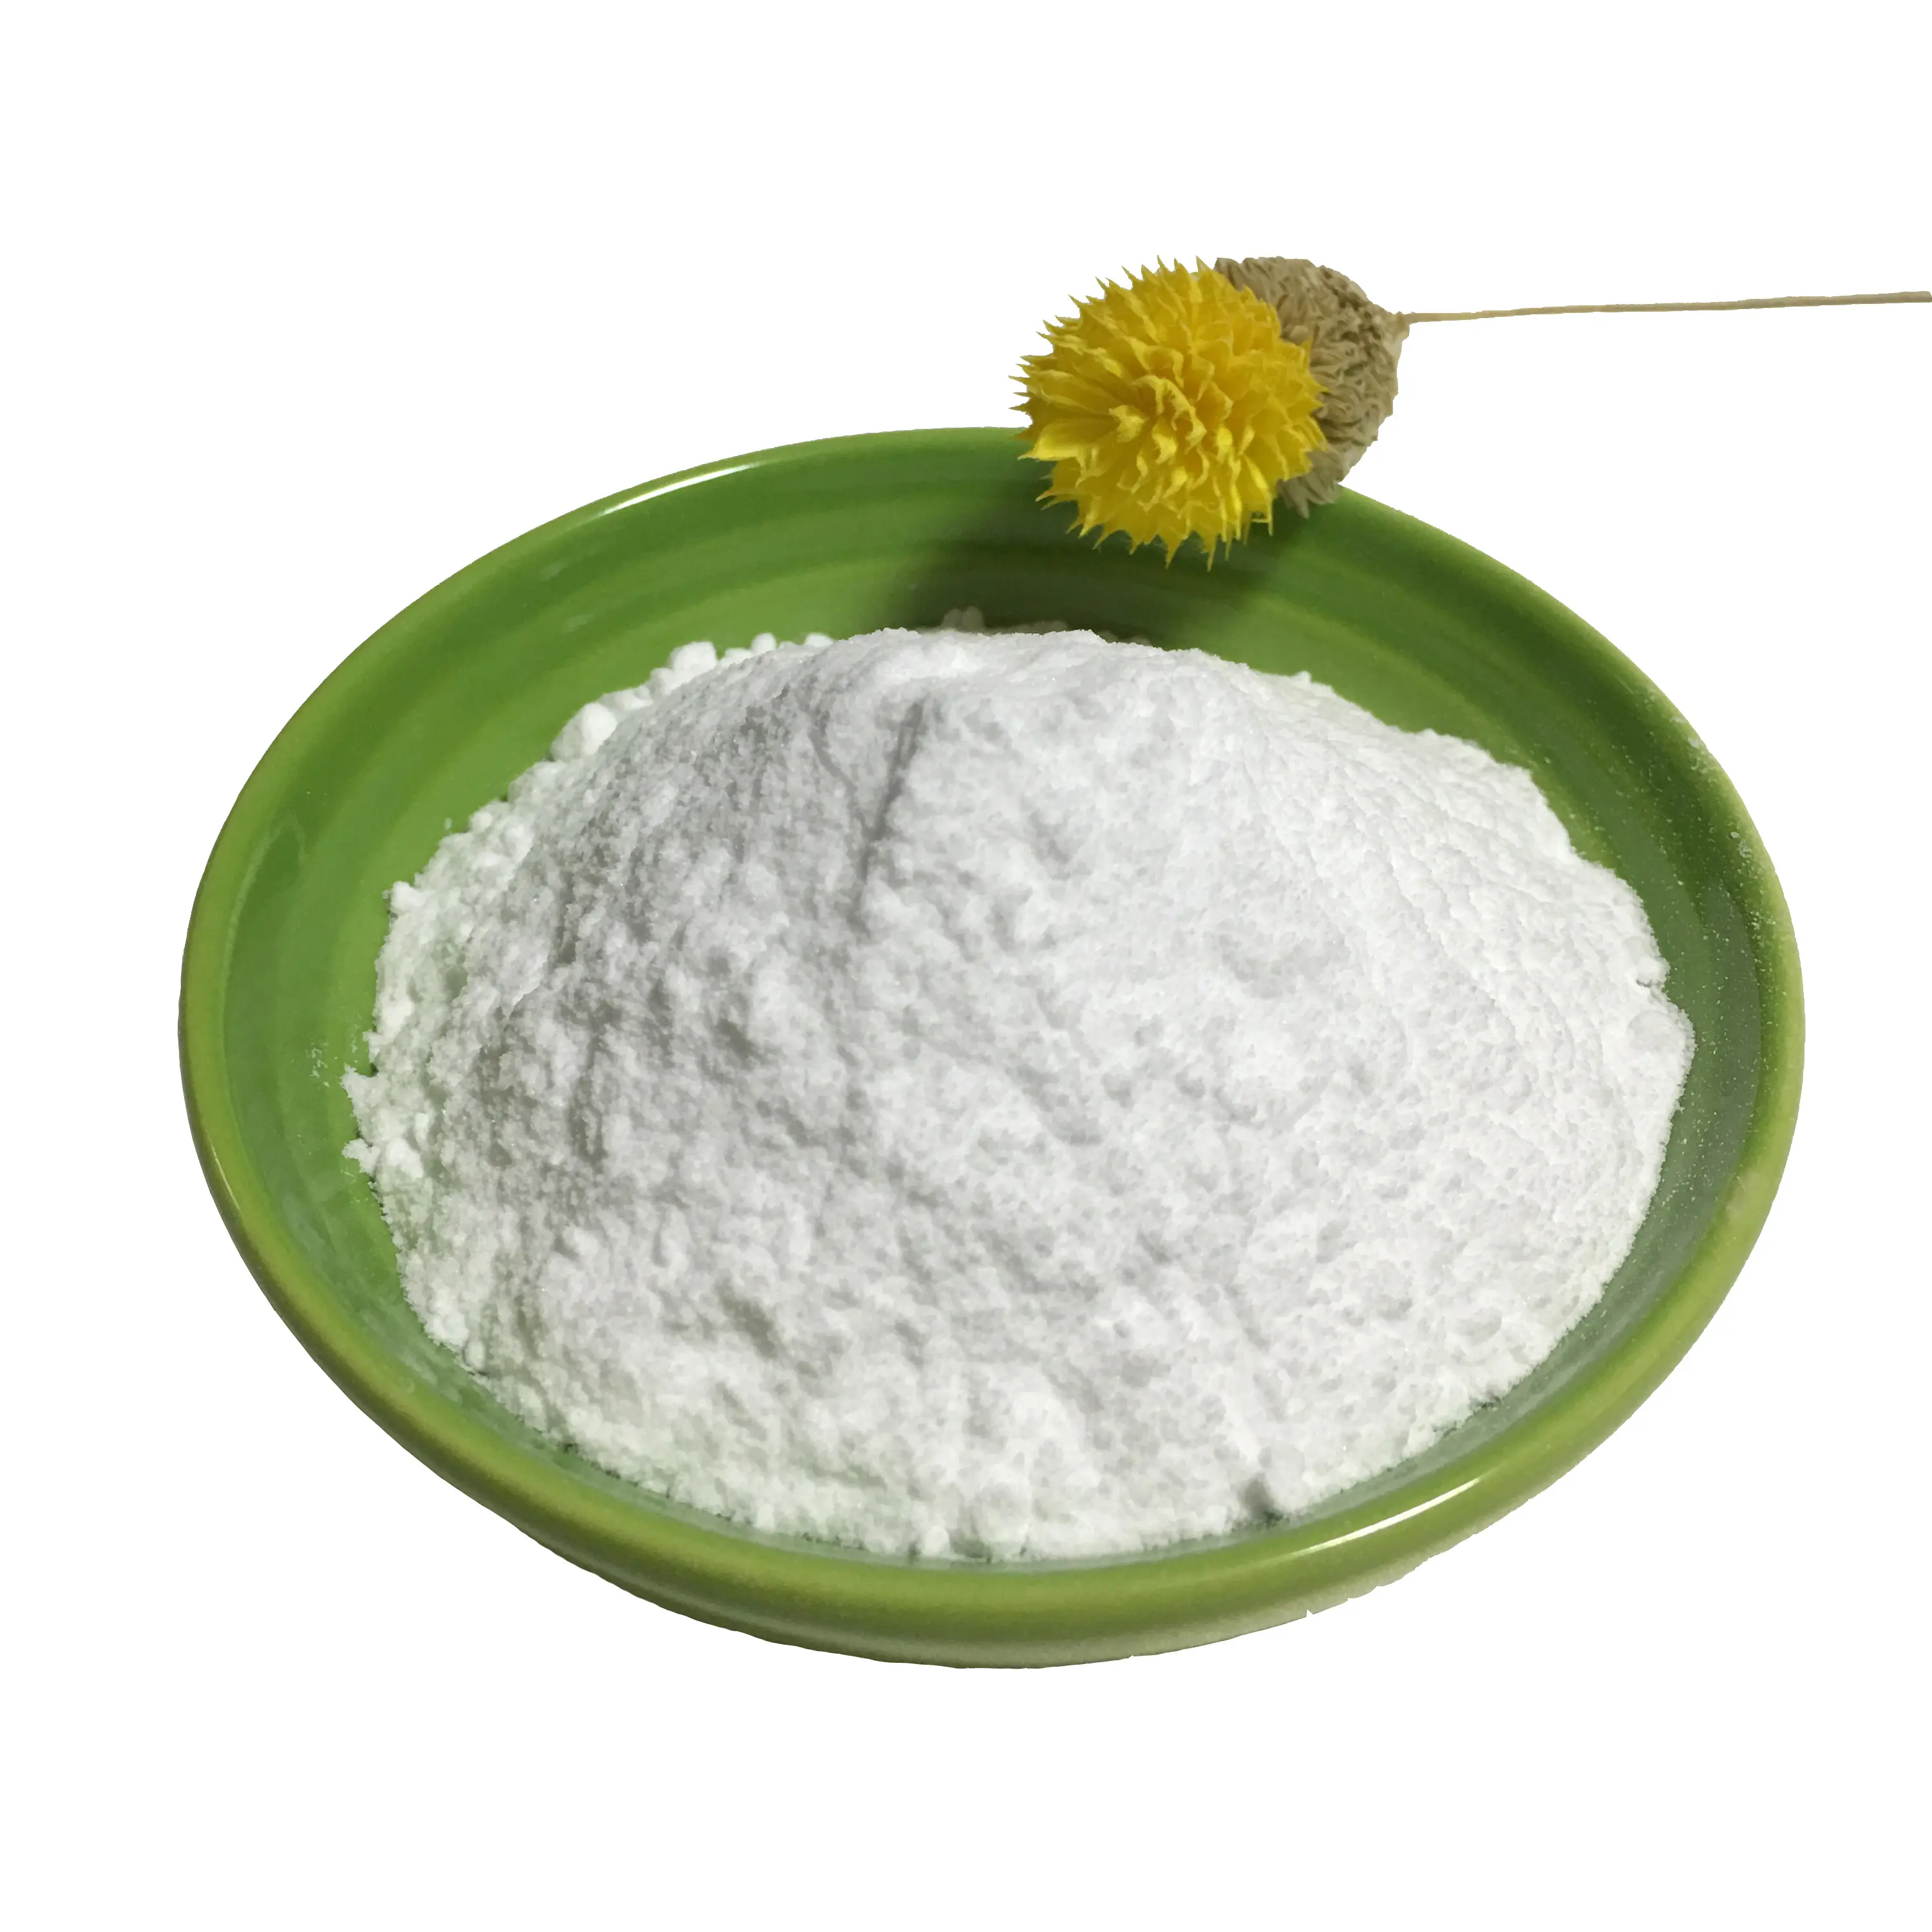 Quality Asured Food Grade 99.5% Monopotassium Phosphate Anhydrous MKP for Food Additives